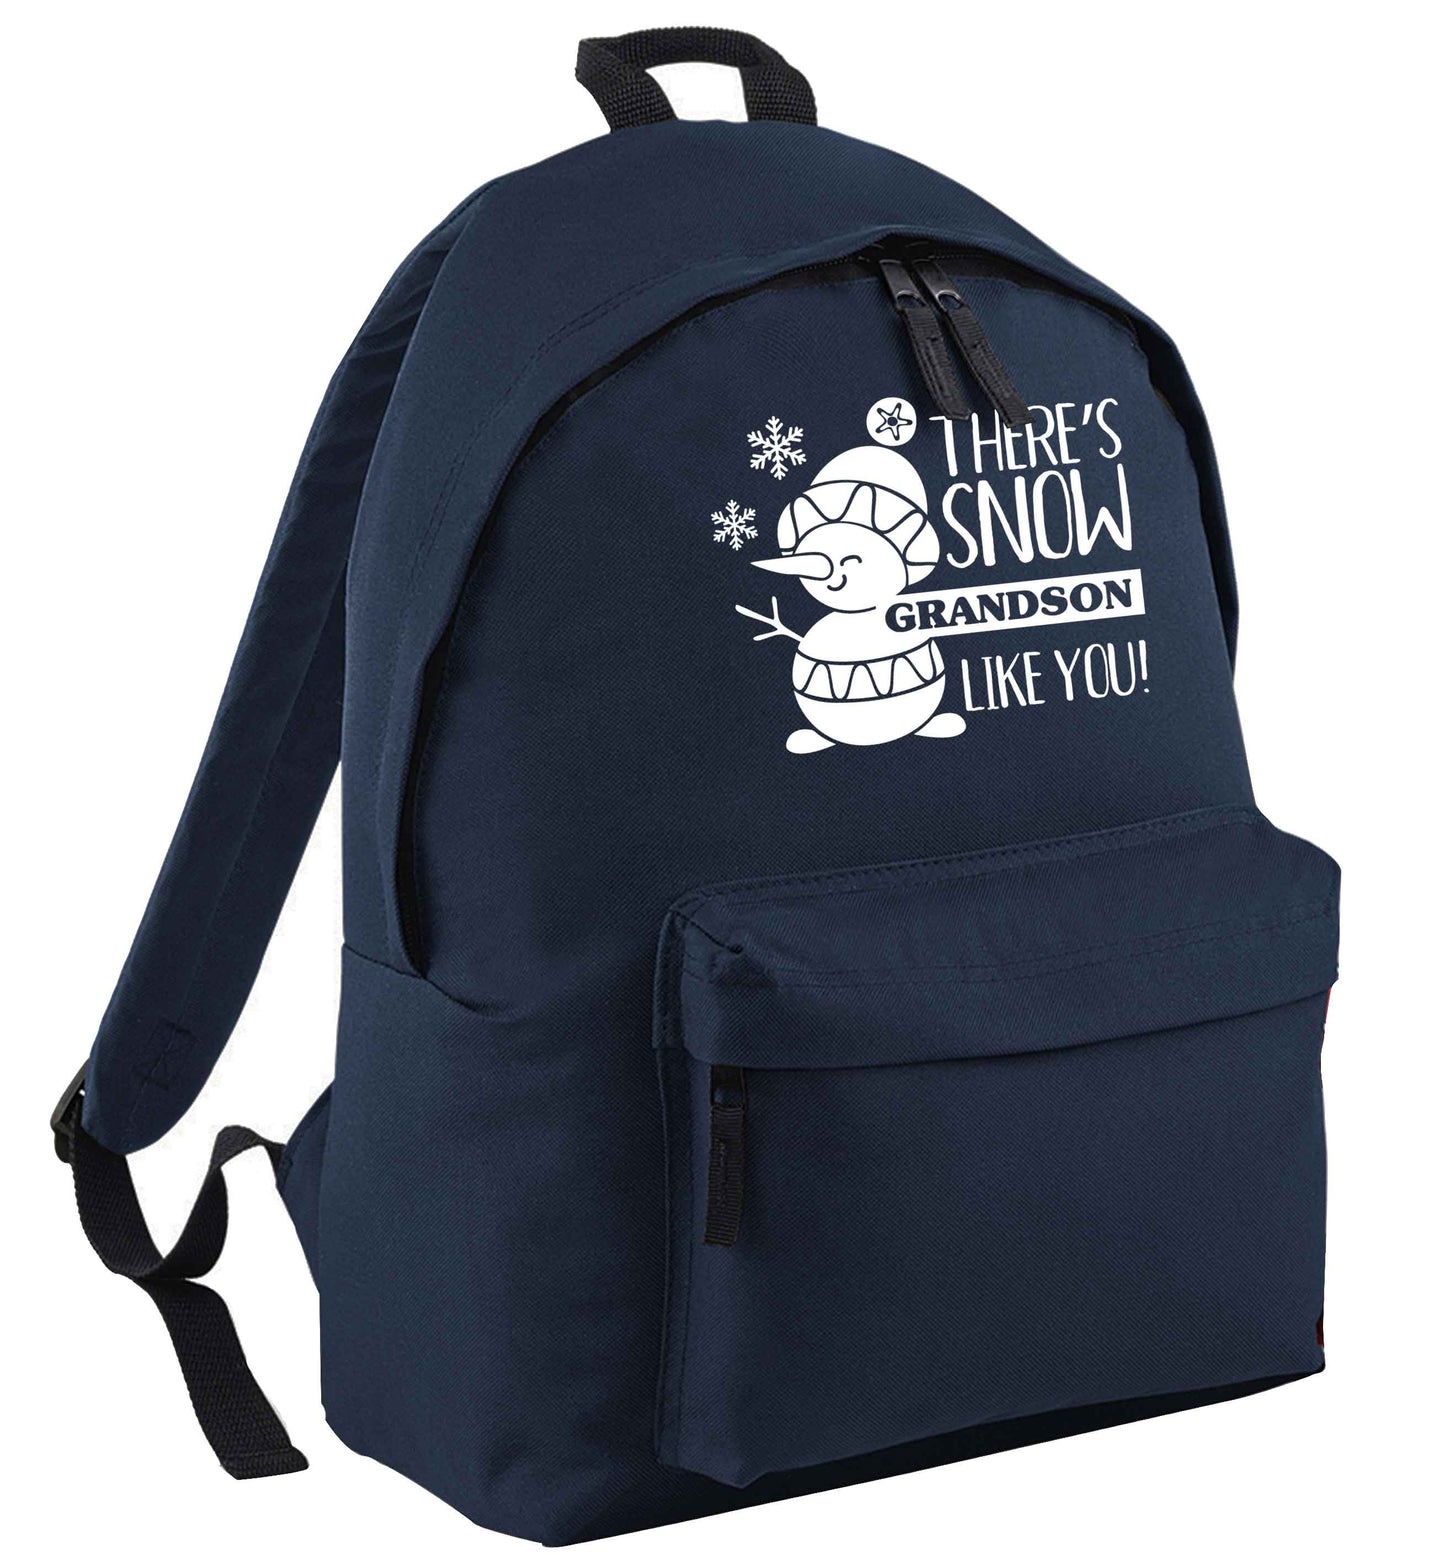 There's snow grandson like you | Children's backpack